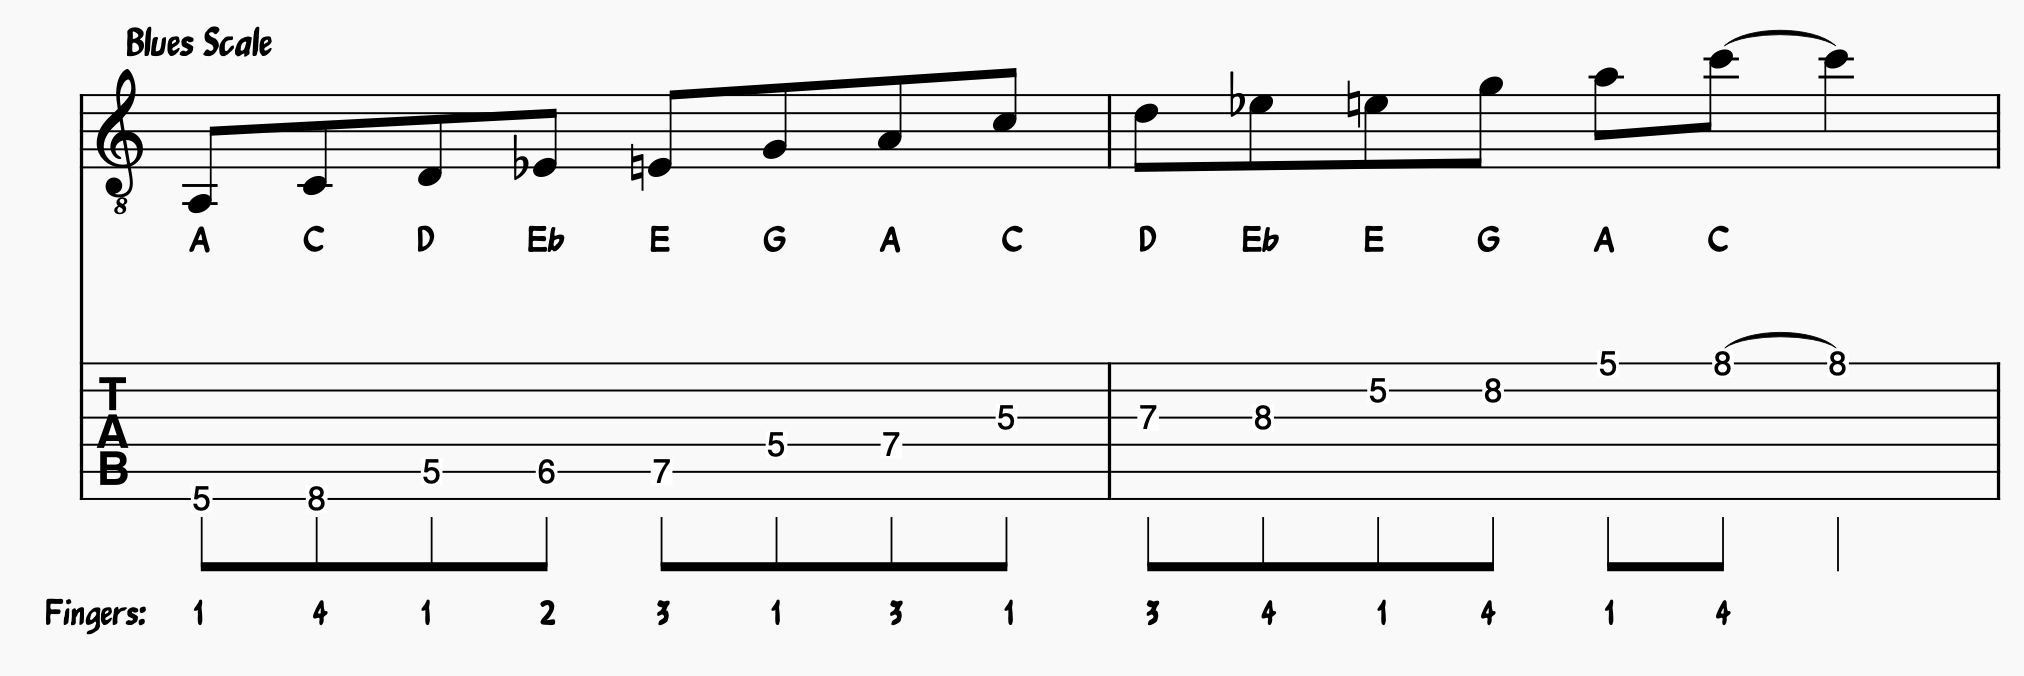 Blues Scale on Guitar